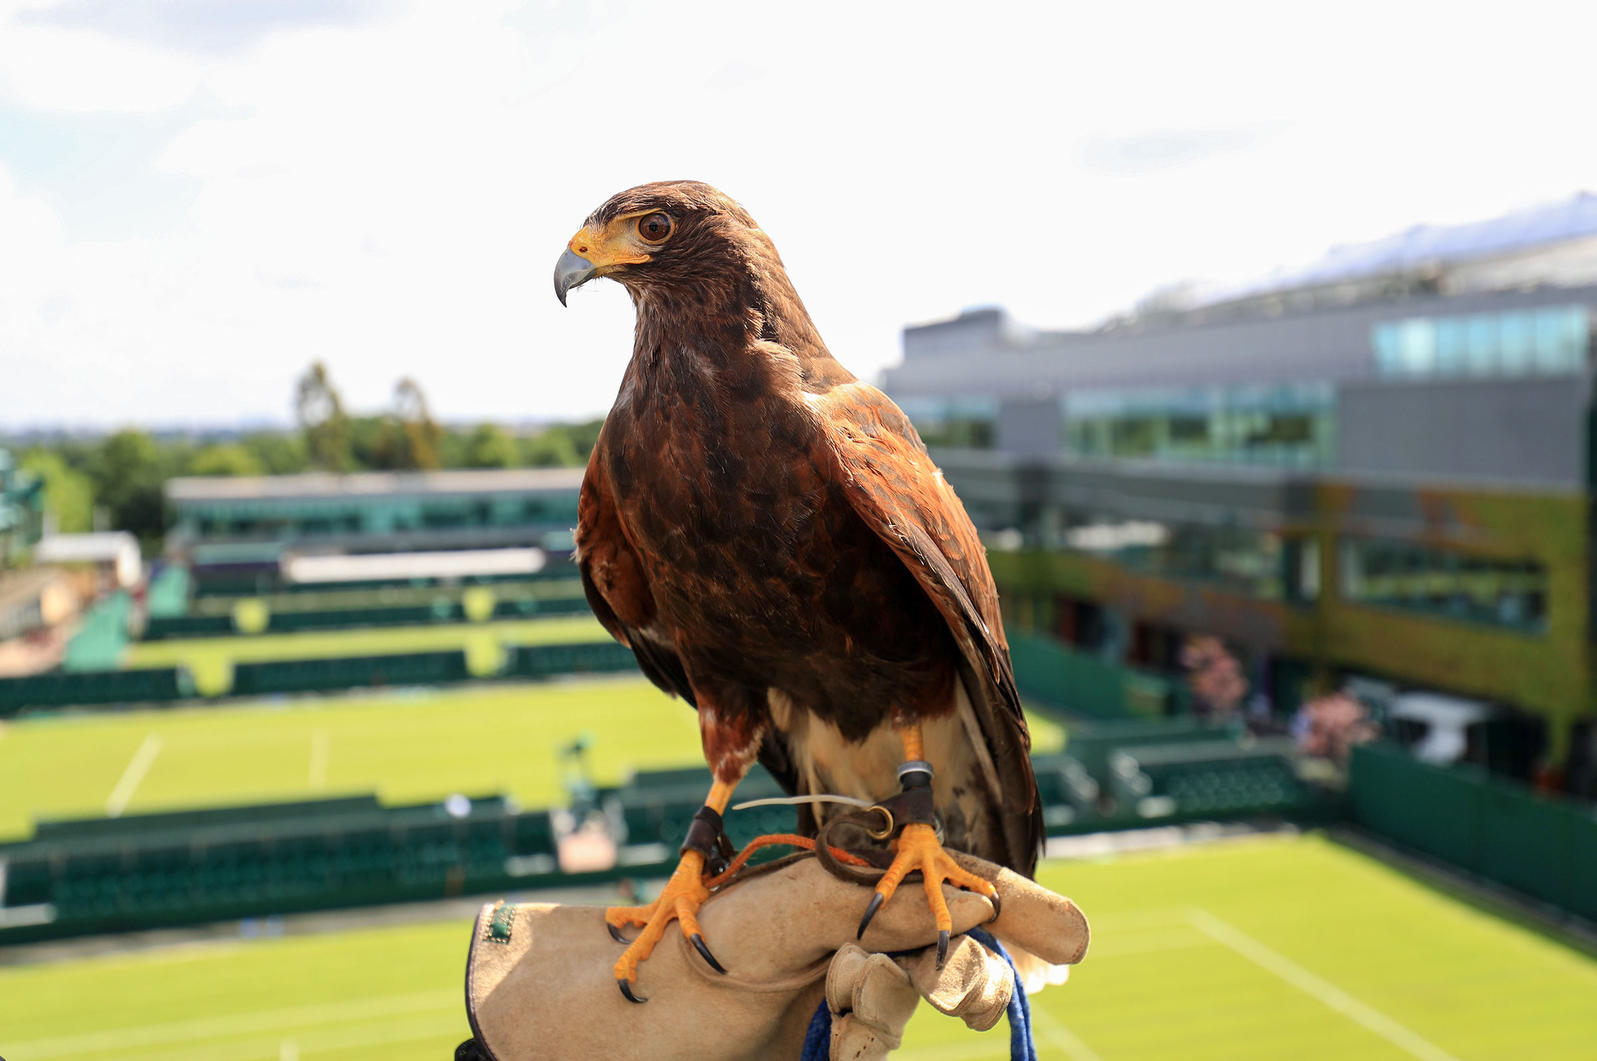 Rufus the hawk at Wimbledon on trainers hand with court in the background.